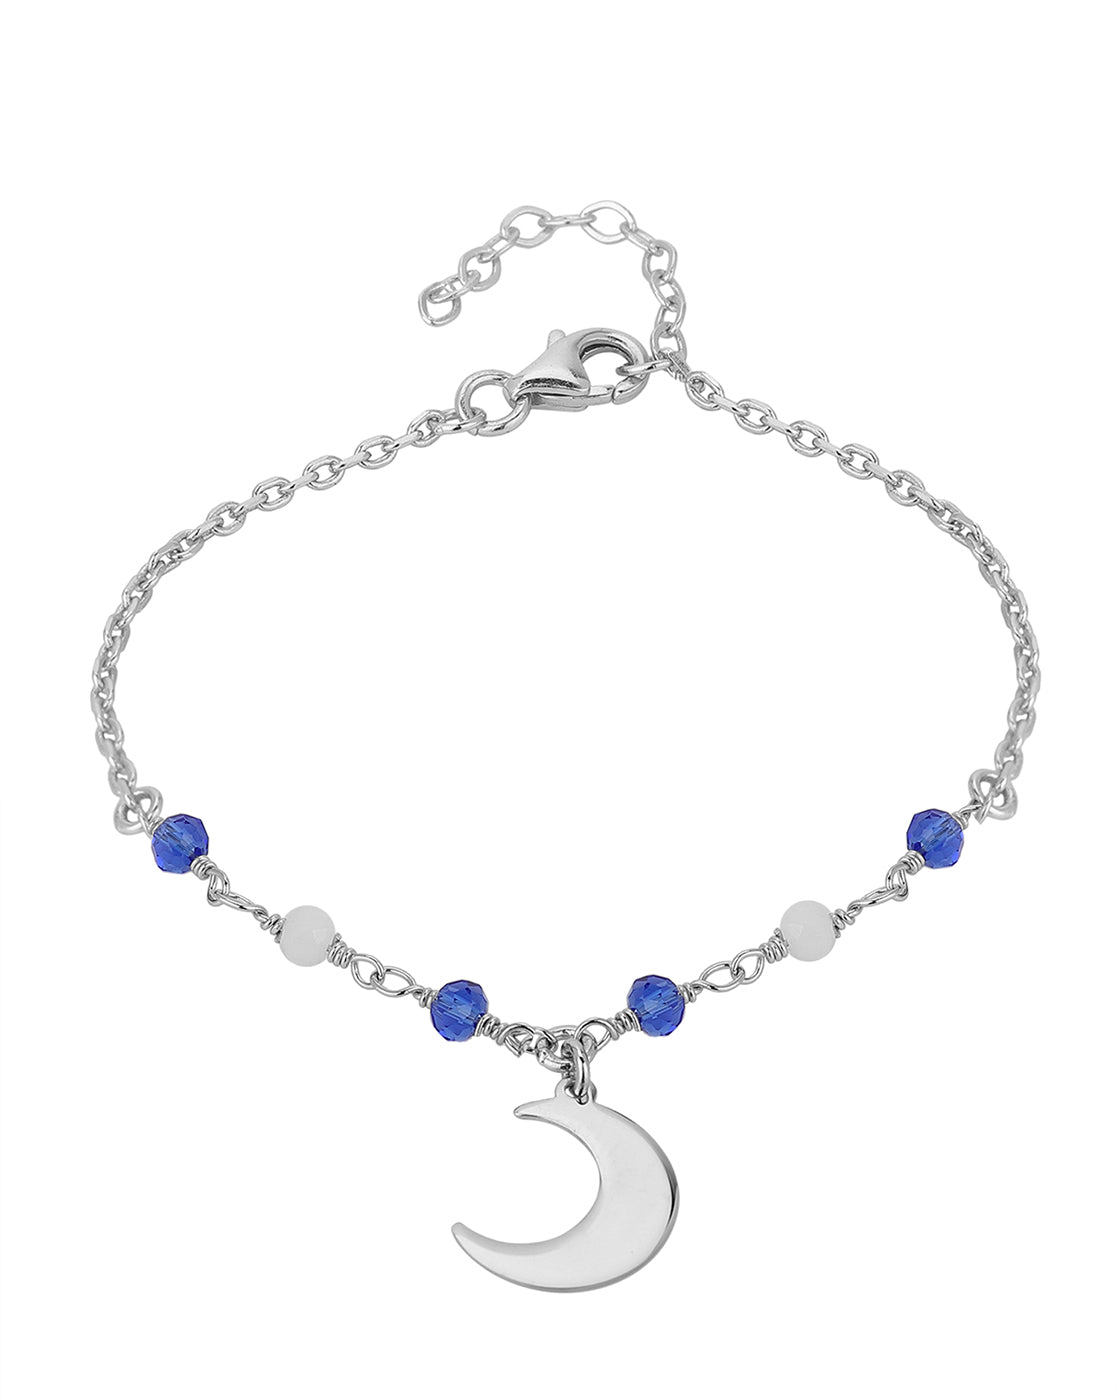 Amazon.com: Stars & Moon Bracelet 925 Sterling Silver/Silver Fashion  Bracelet/Dainty Silver Bracelet/Star and Celestial Bracelet/Gift for Her :  Handmade Products